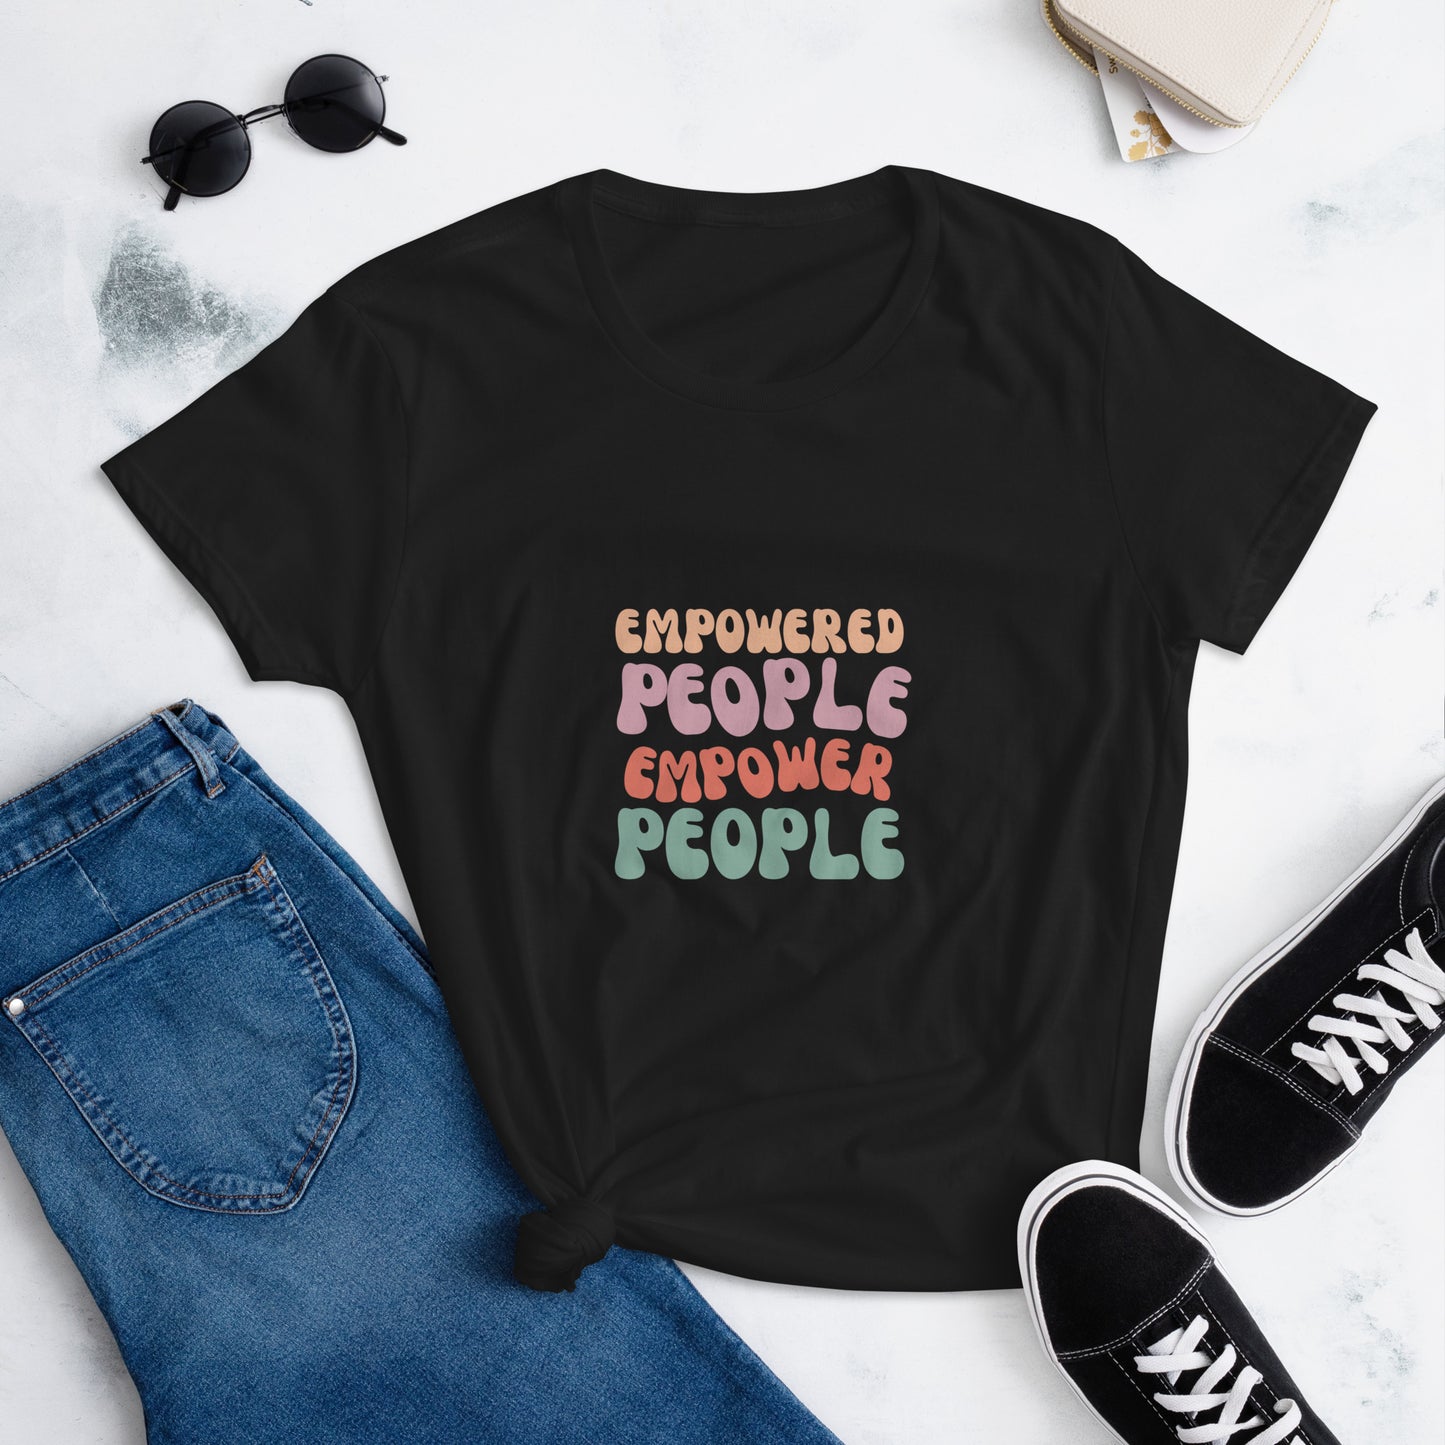 Empowered People short sleeve t-shirt